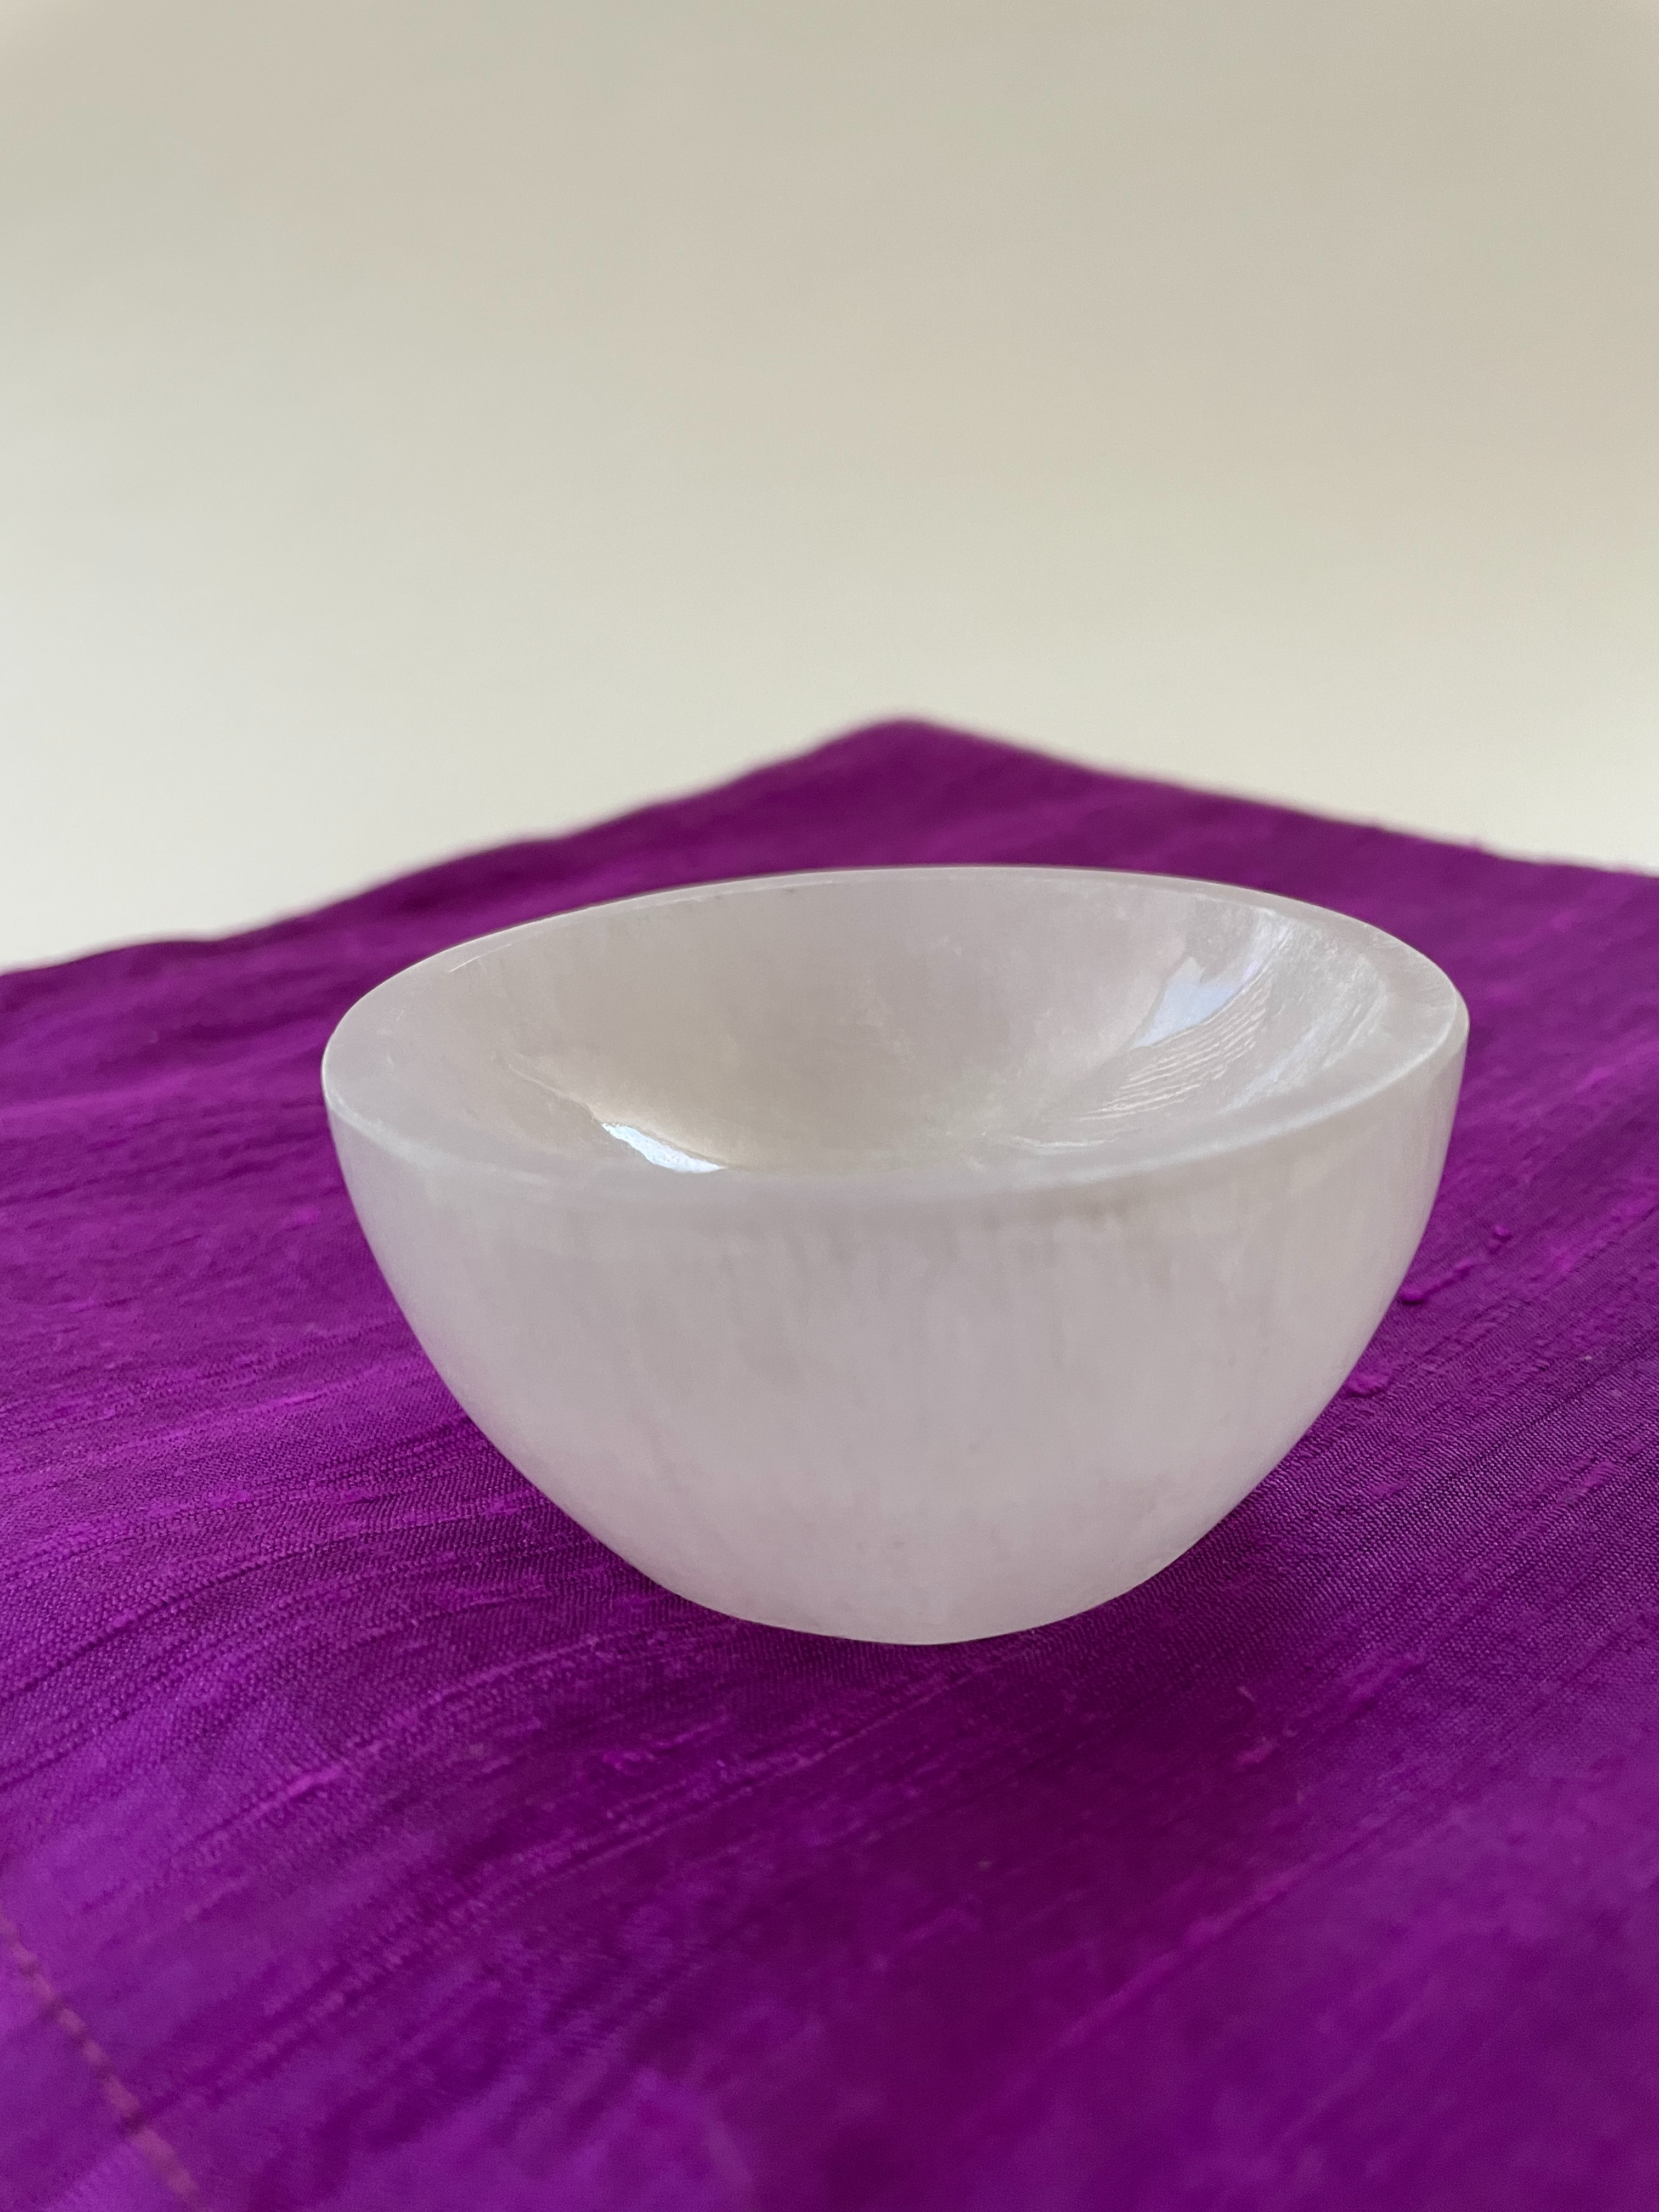 If you look closely, you can see the sparkles in this beautiful carved selenite bowl. It can be used for cleansing and charging your crystals and jewelry because it dispels negative and unwanted energies. Selenite also promotes clarity of mind, opens the crown chakra, helps to access angelic energies and guidance from the higher realms. It brings peace and is a great stone to use while meditating or connecting spiritually and more. The bowls are approximately 2¾"-3" in diameter. Cost is $12.